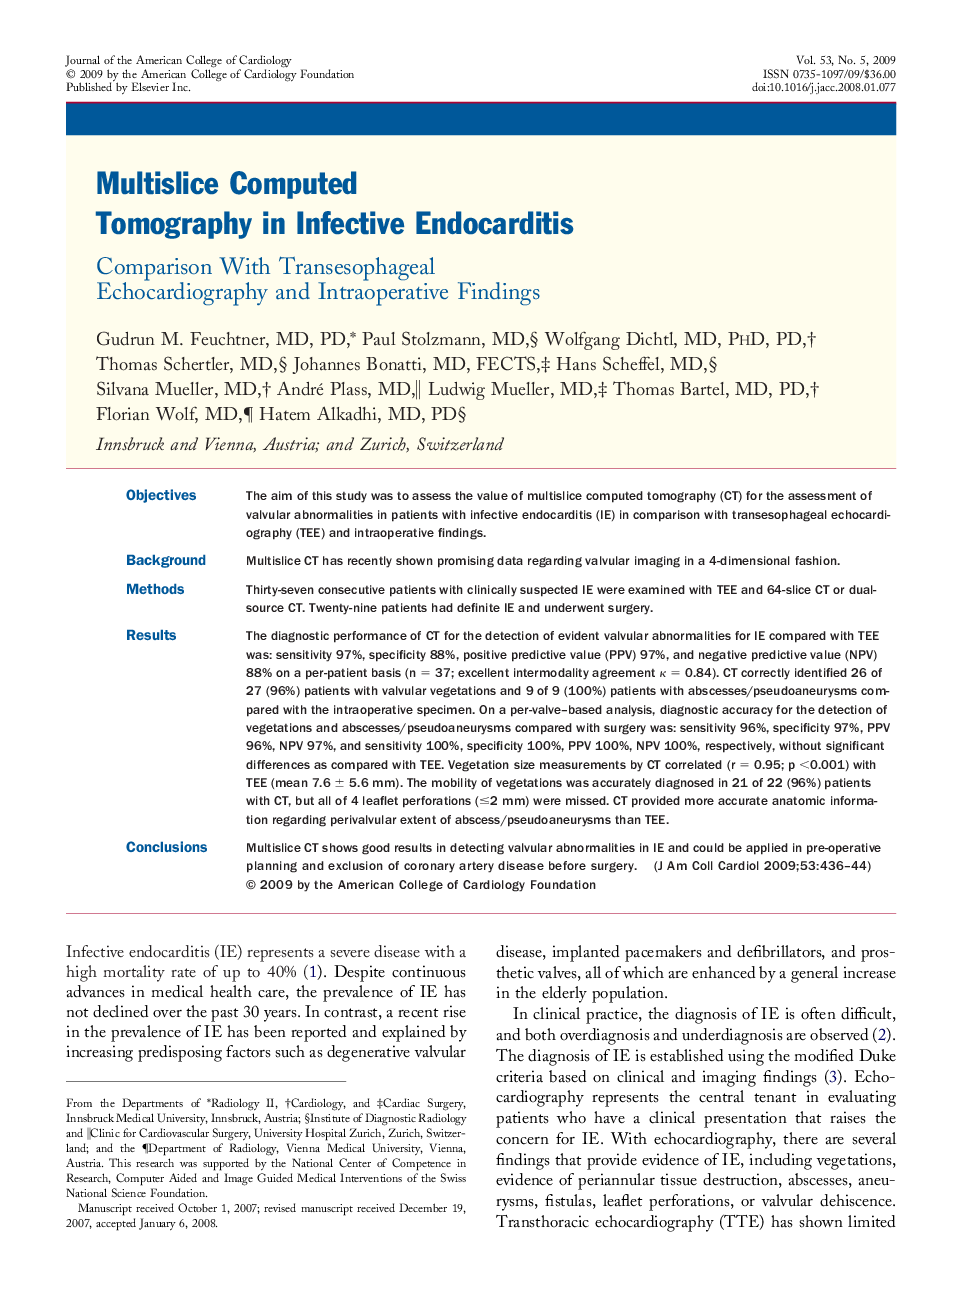 Multislice Computed Tomography in Infective Endocarditis : Comparison With Transesophageal Echocardiography and Intraoperative Findings